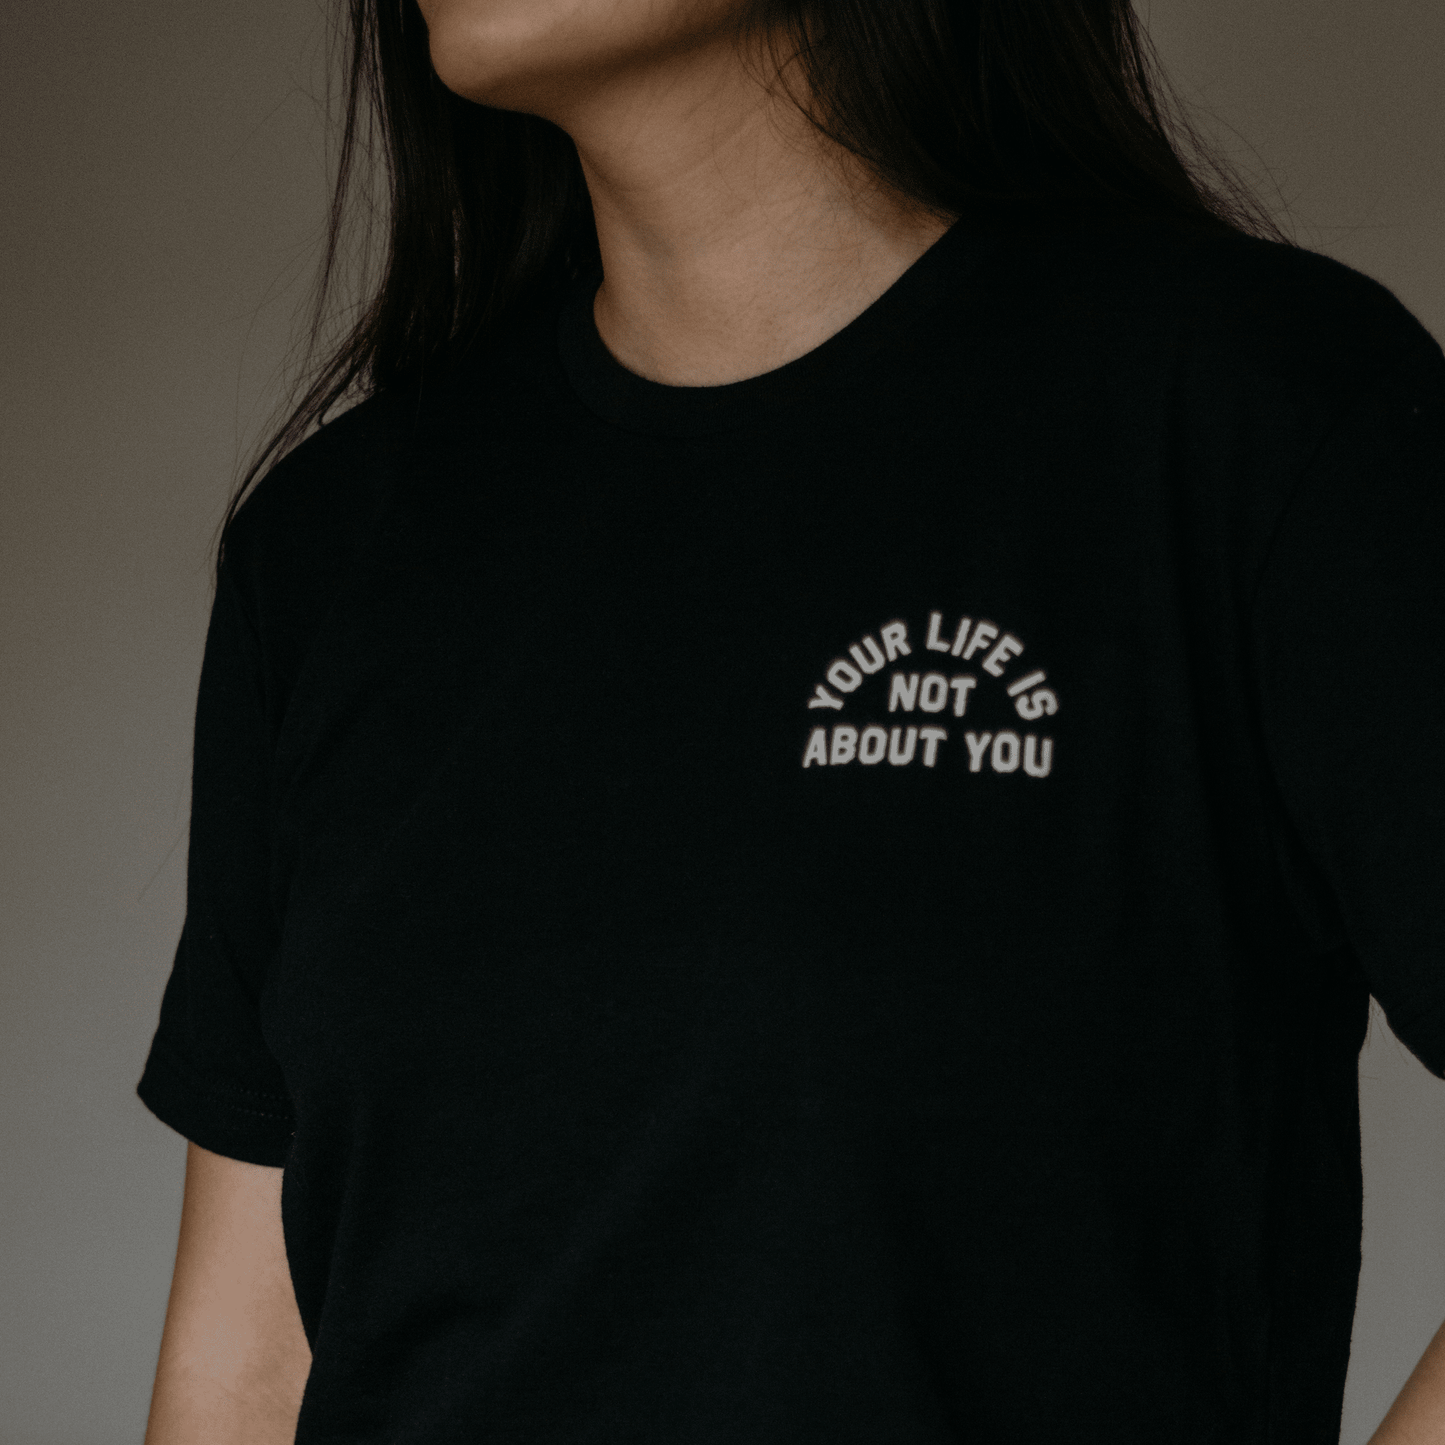 Your Life is Not About You T-Shirt